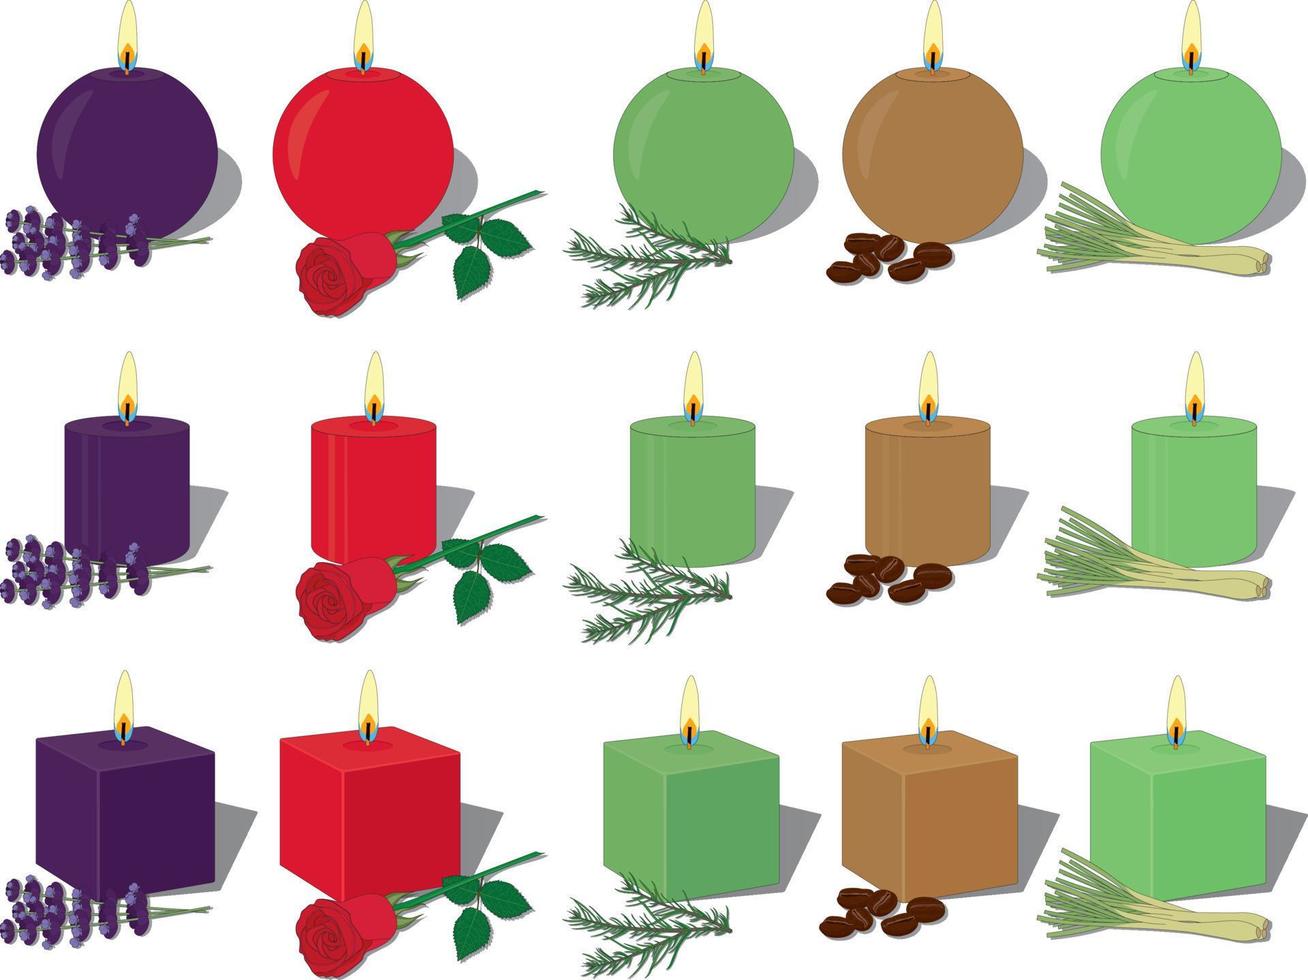 Wax aroma scented candles different forms collection vector illustration